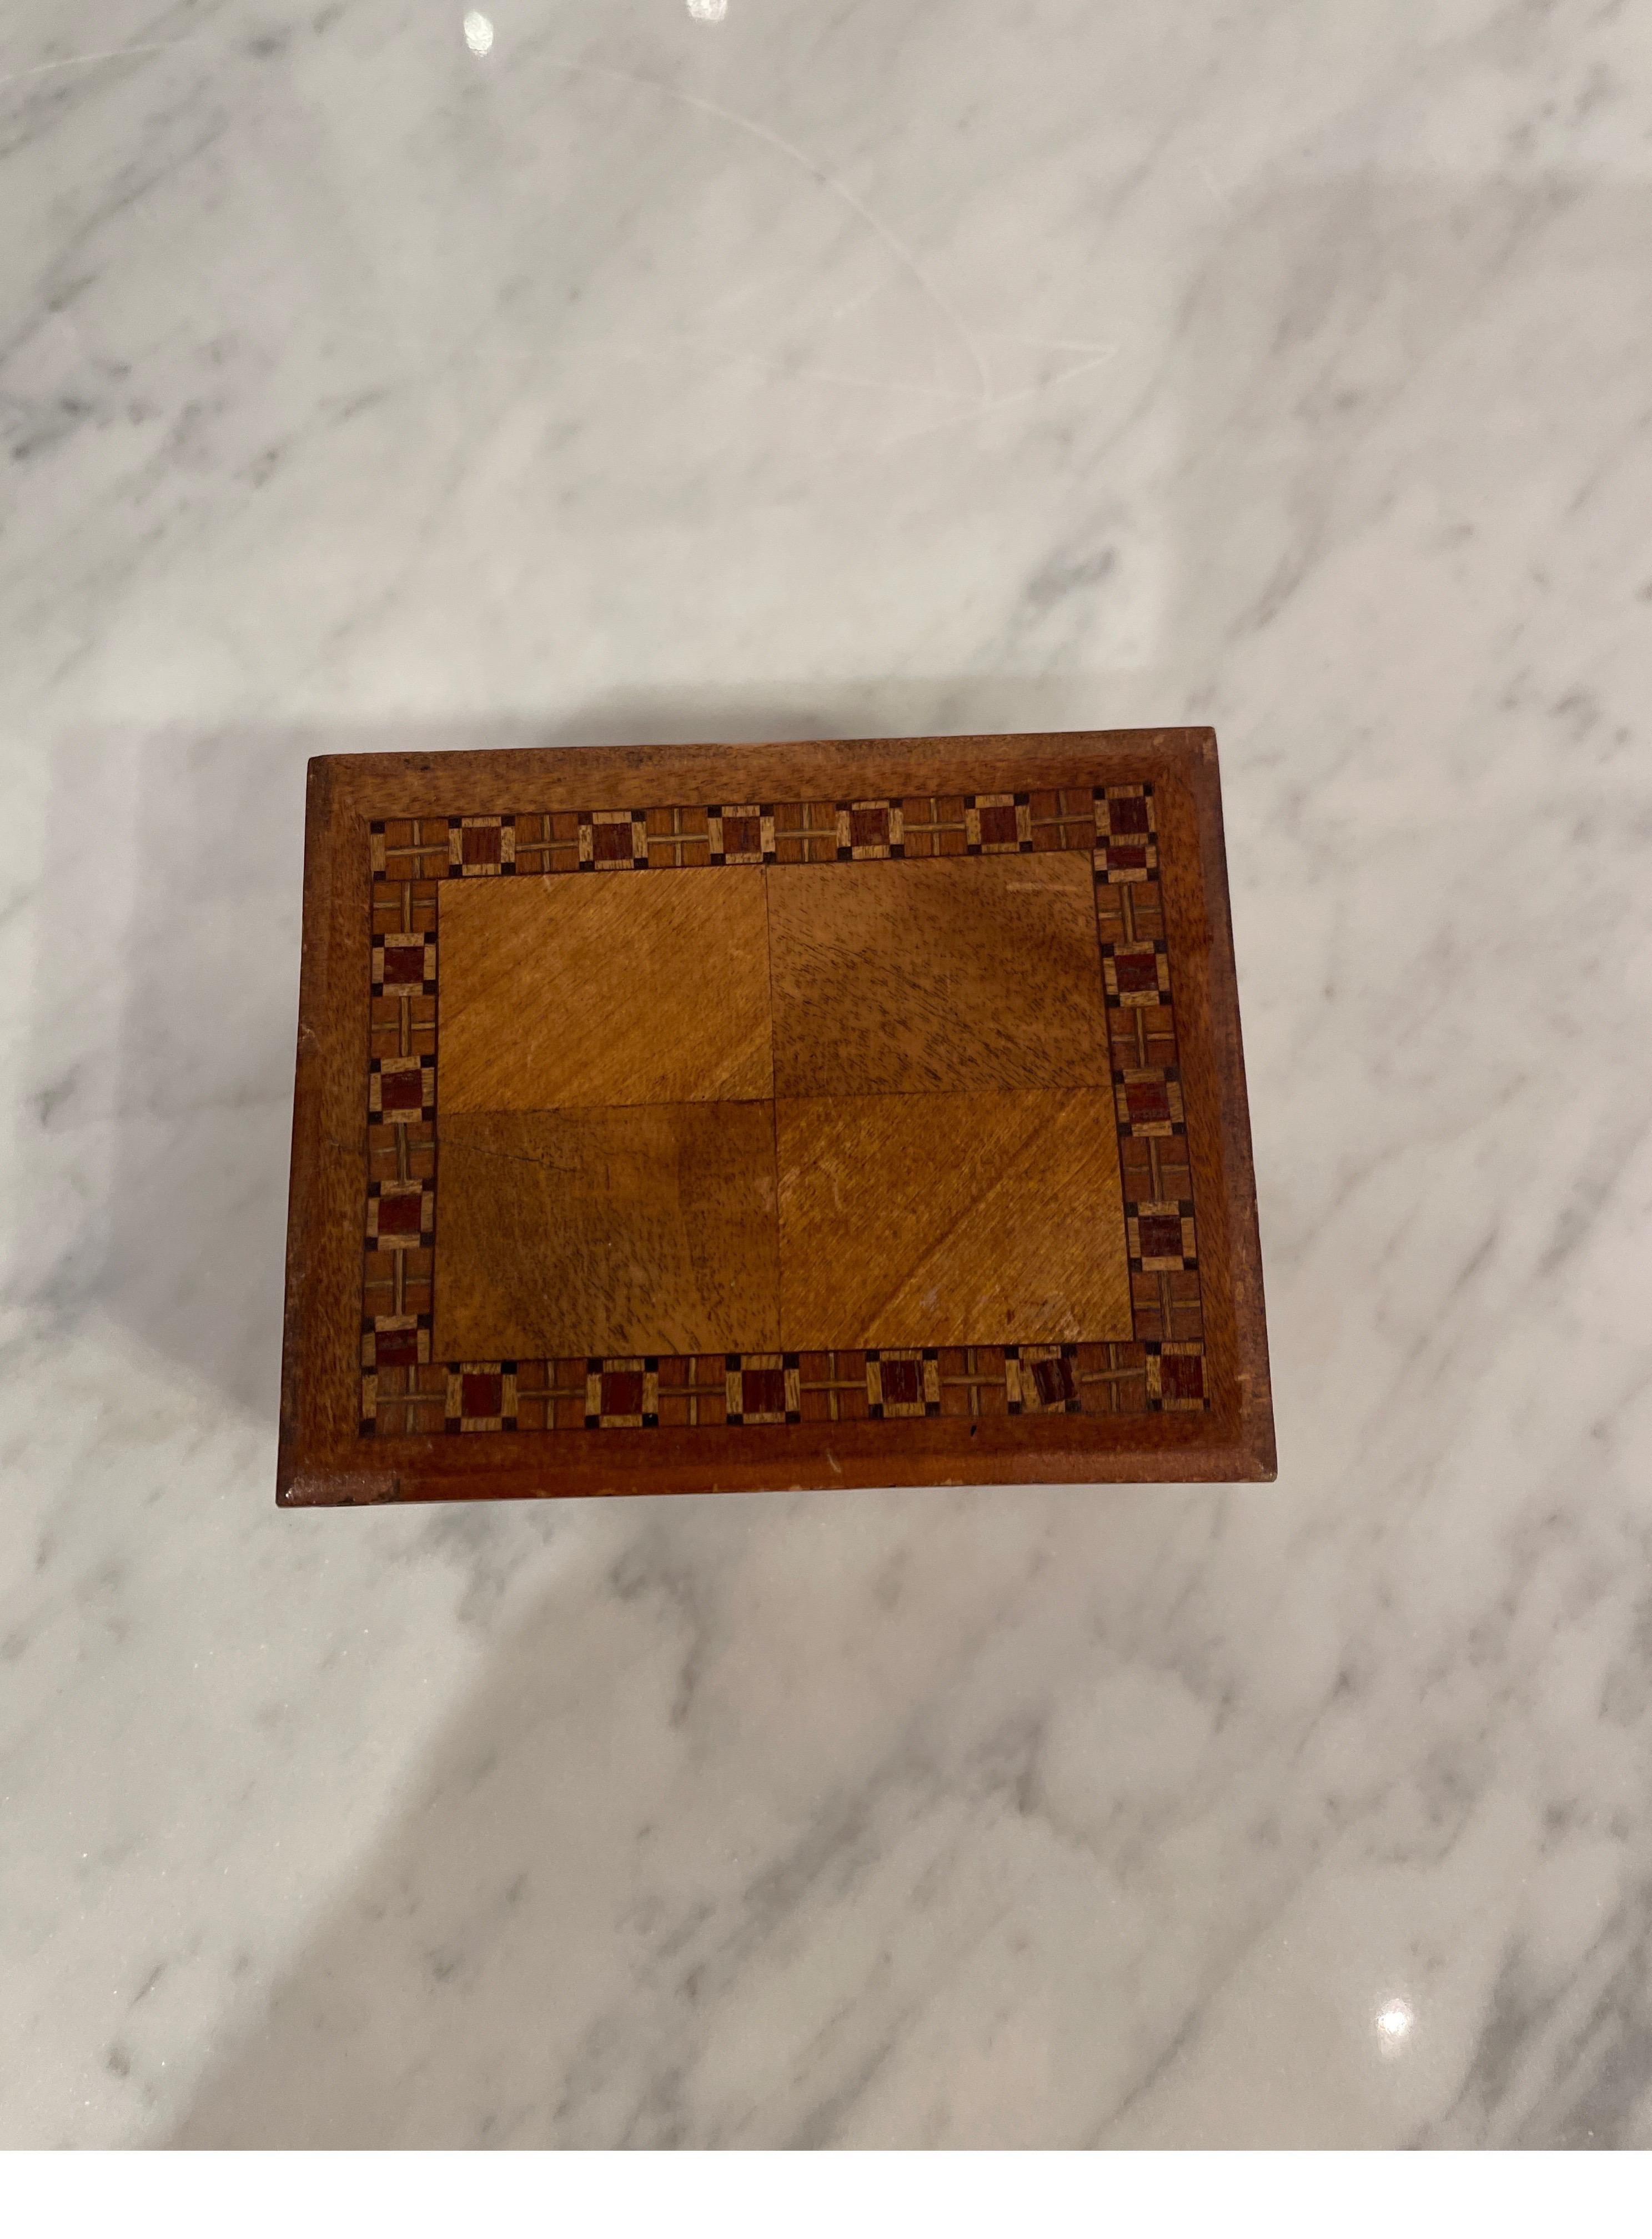  
Everybody has that special place where they hold their tiny mementos and what better place to store them than this beautiful Turnbridge Box. This wooden box with a beautiful wooden inlay has small pedestal feet with a hinged opening.

Measures: 3